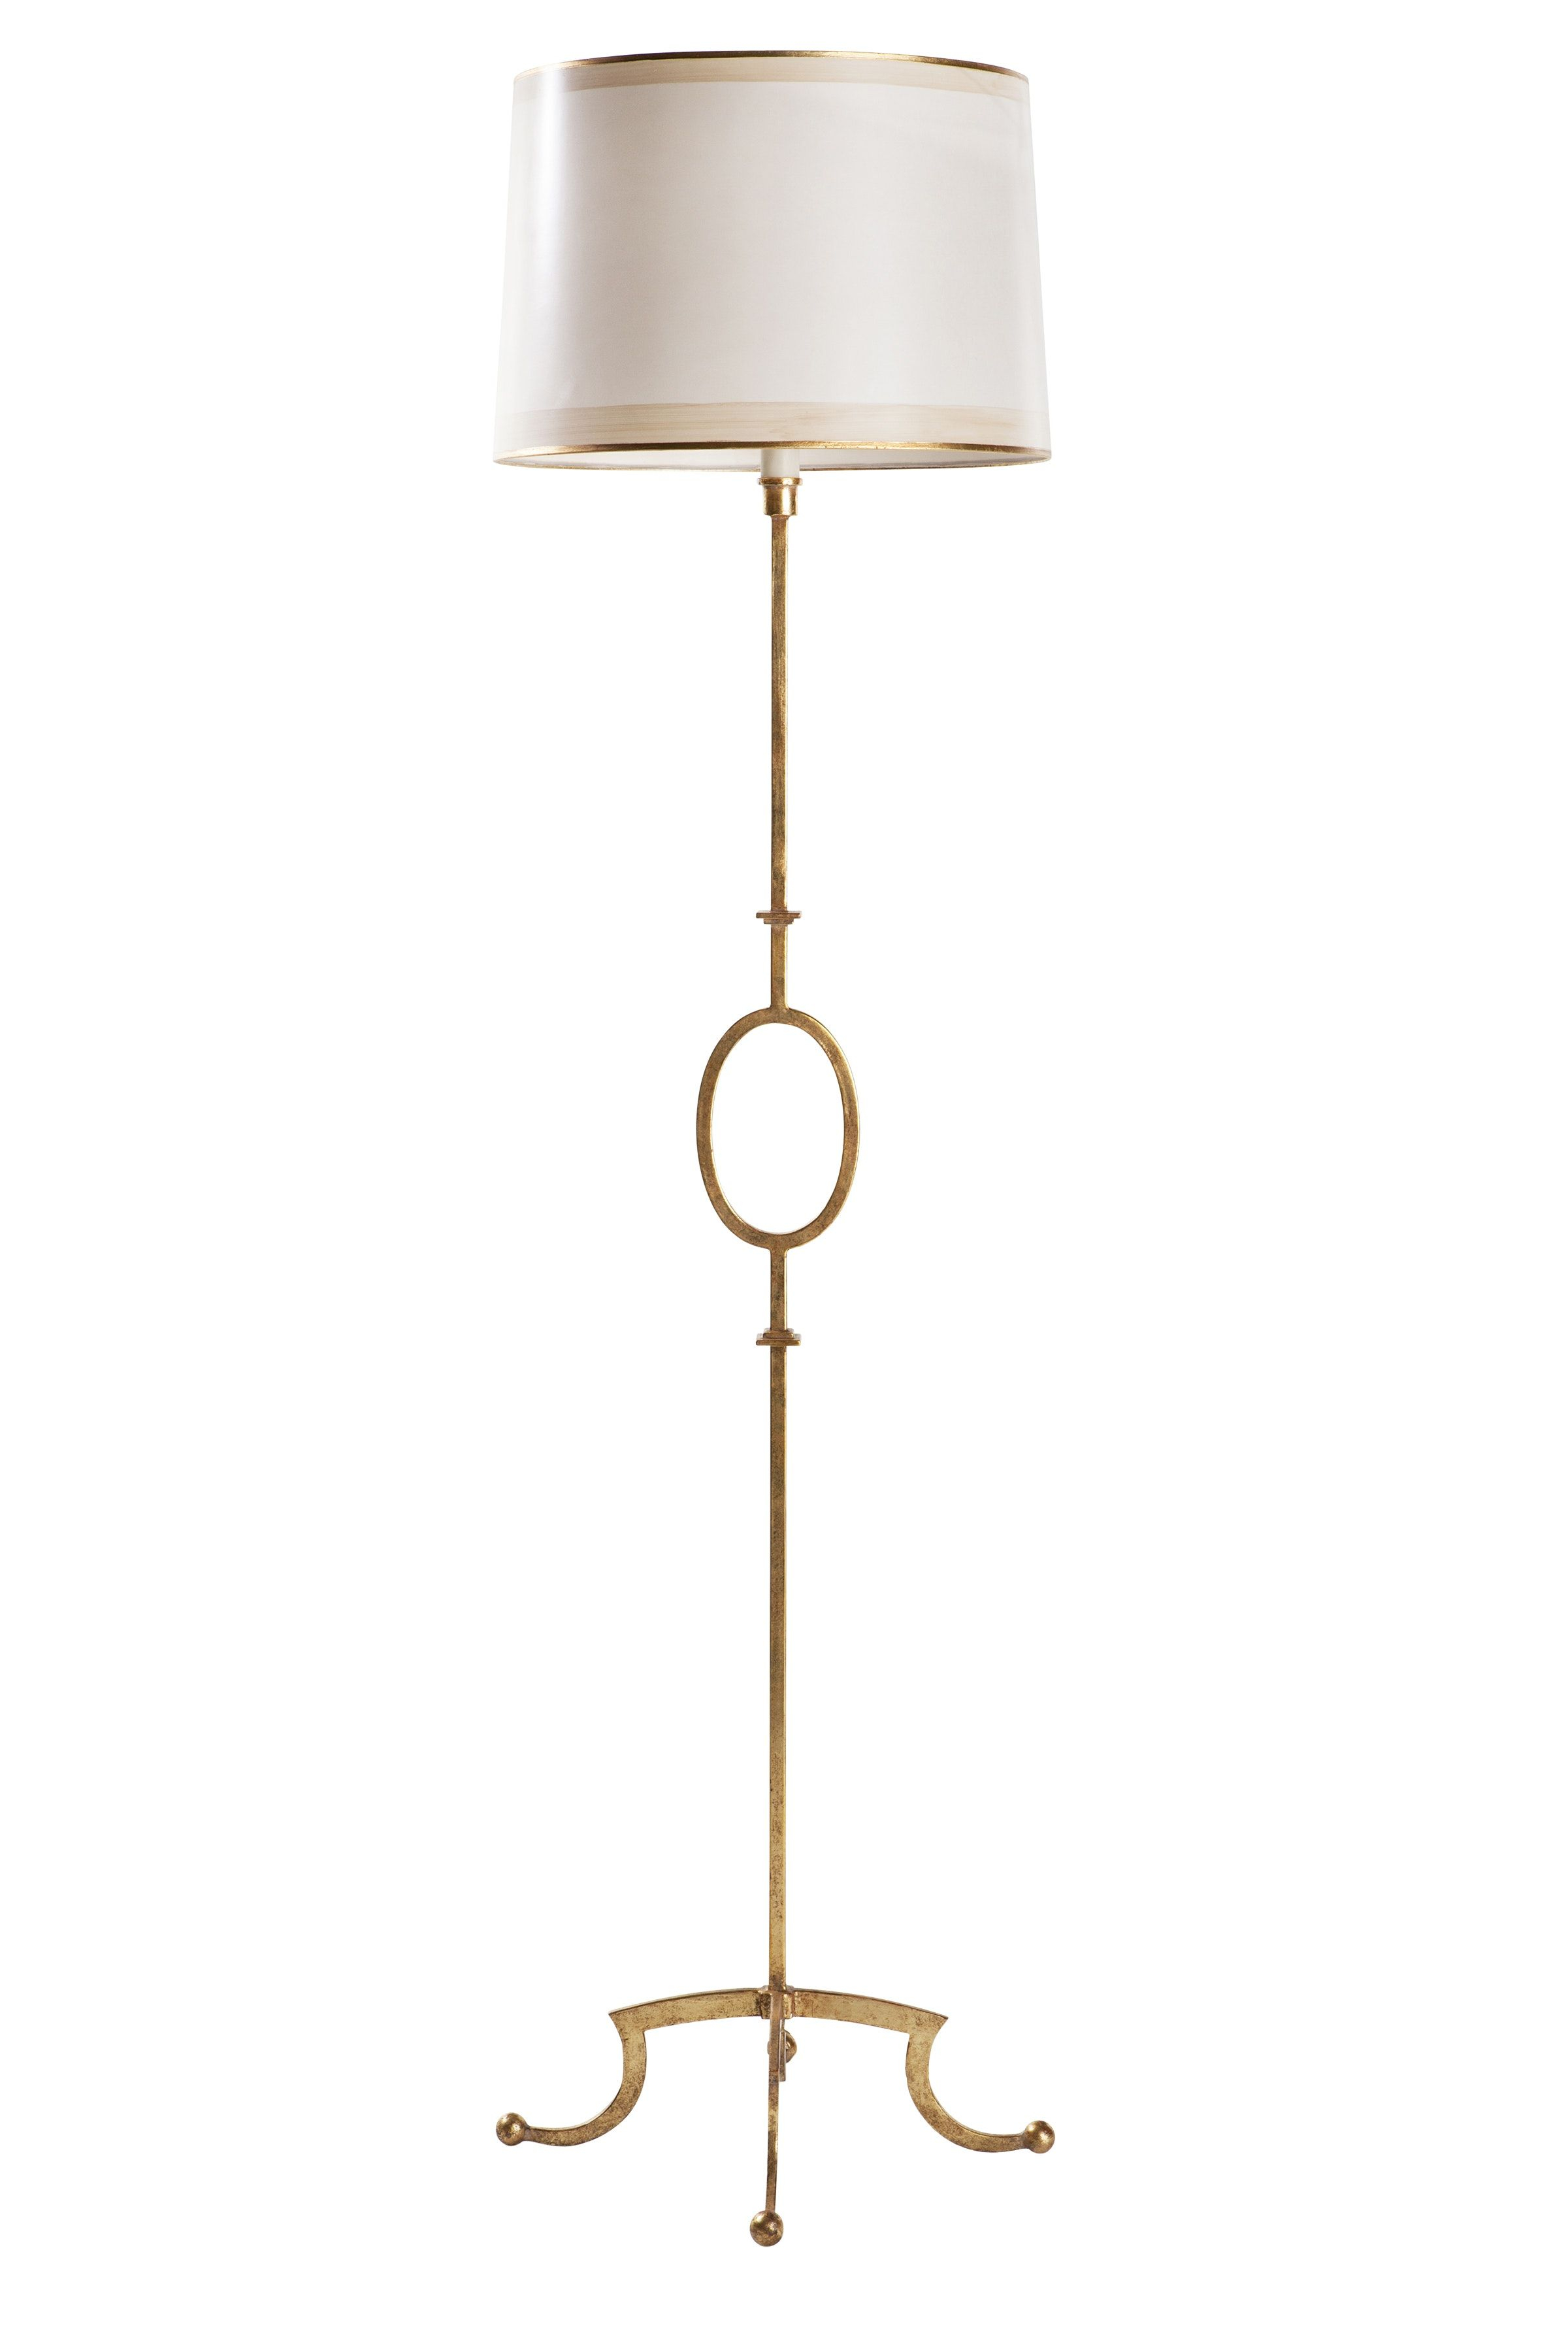 Leleu Floor Lamp Traditional Transitional Floor Lamps intended for sizing 2400 X 3600